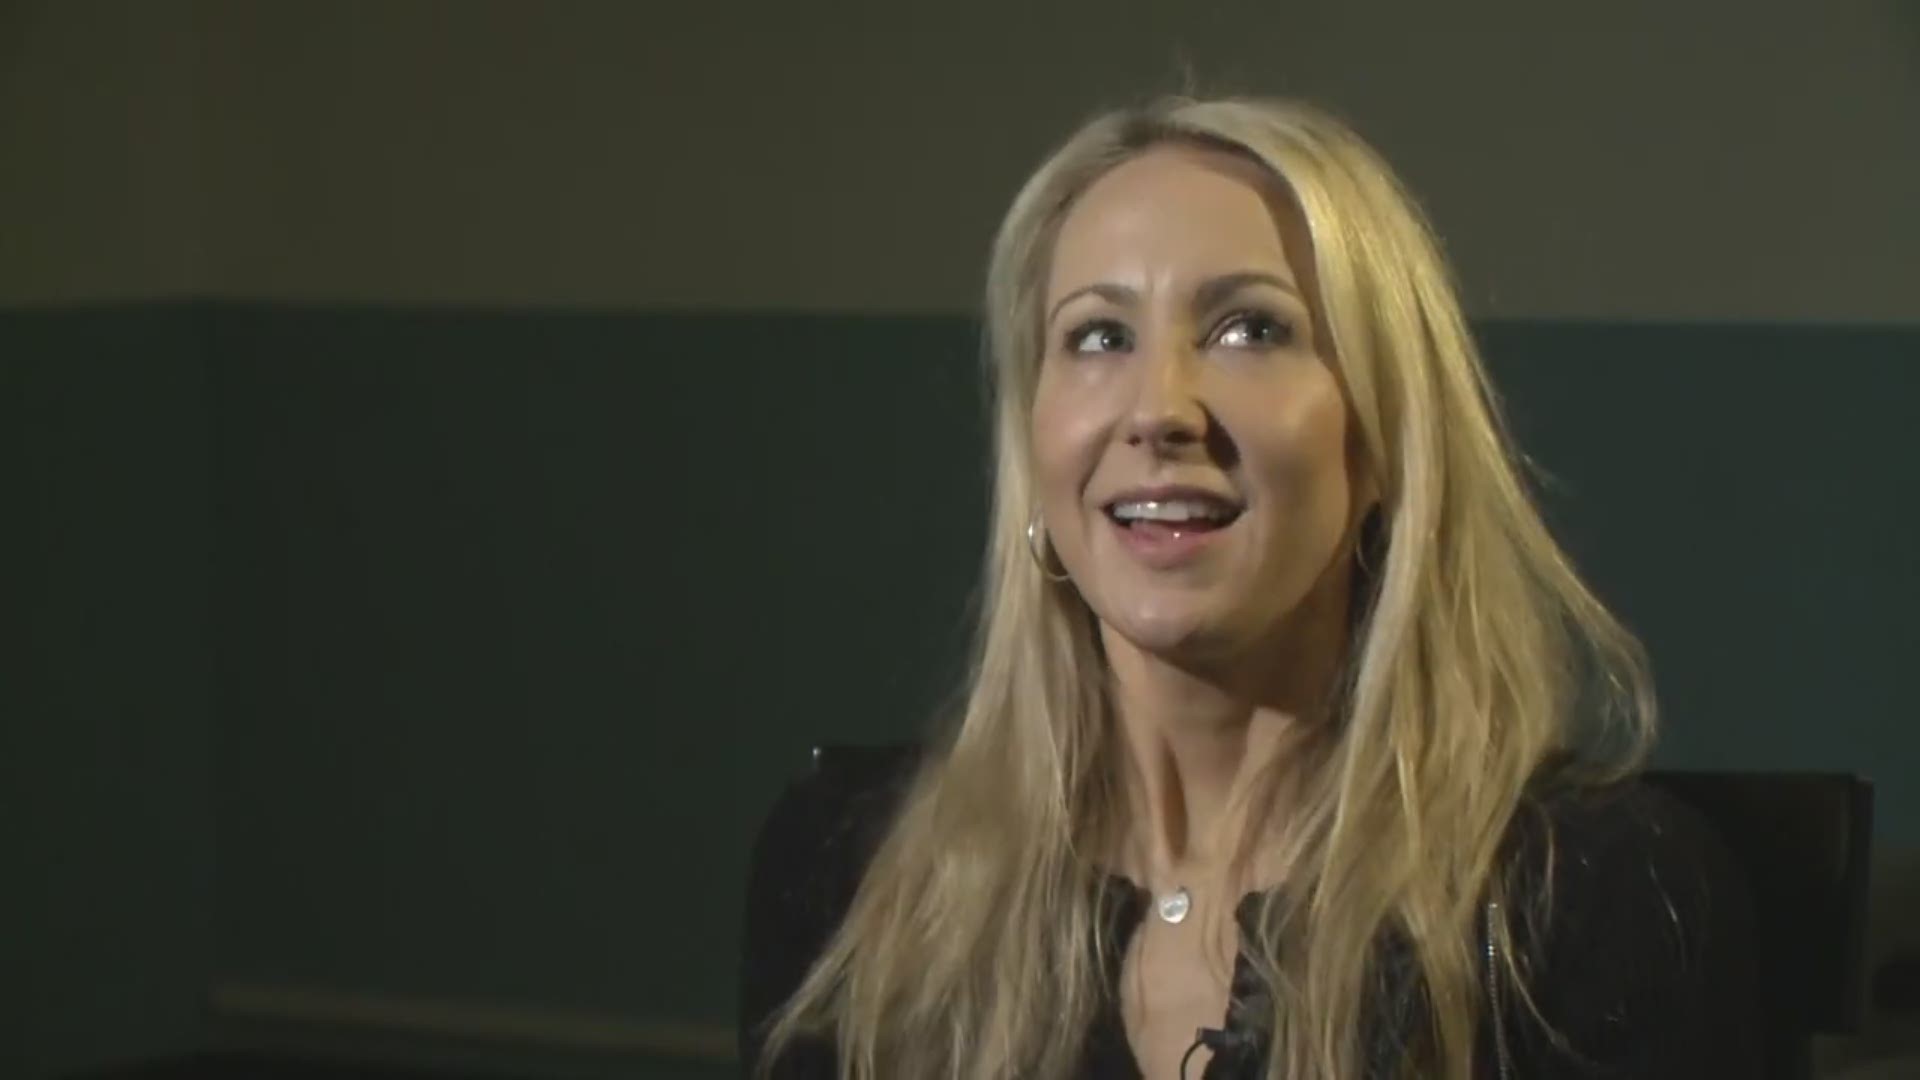 Nikki Glaser is one of the hottest comedians in the country, and she's getting ready to tape a Netflix special. But she says St. Louis will always be home.